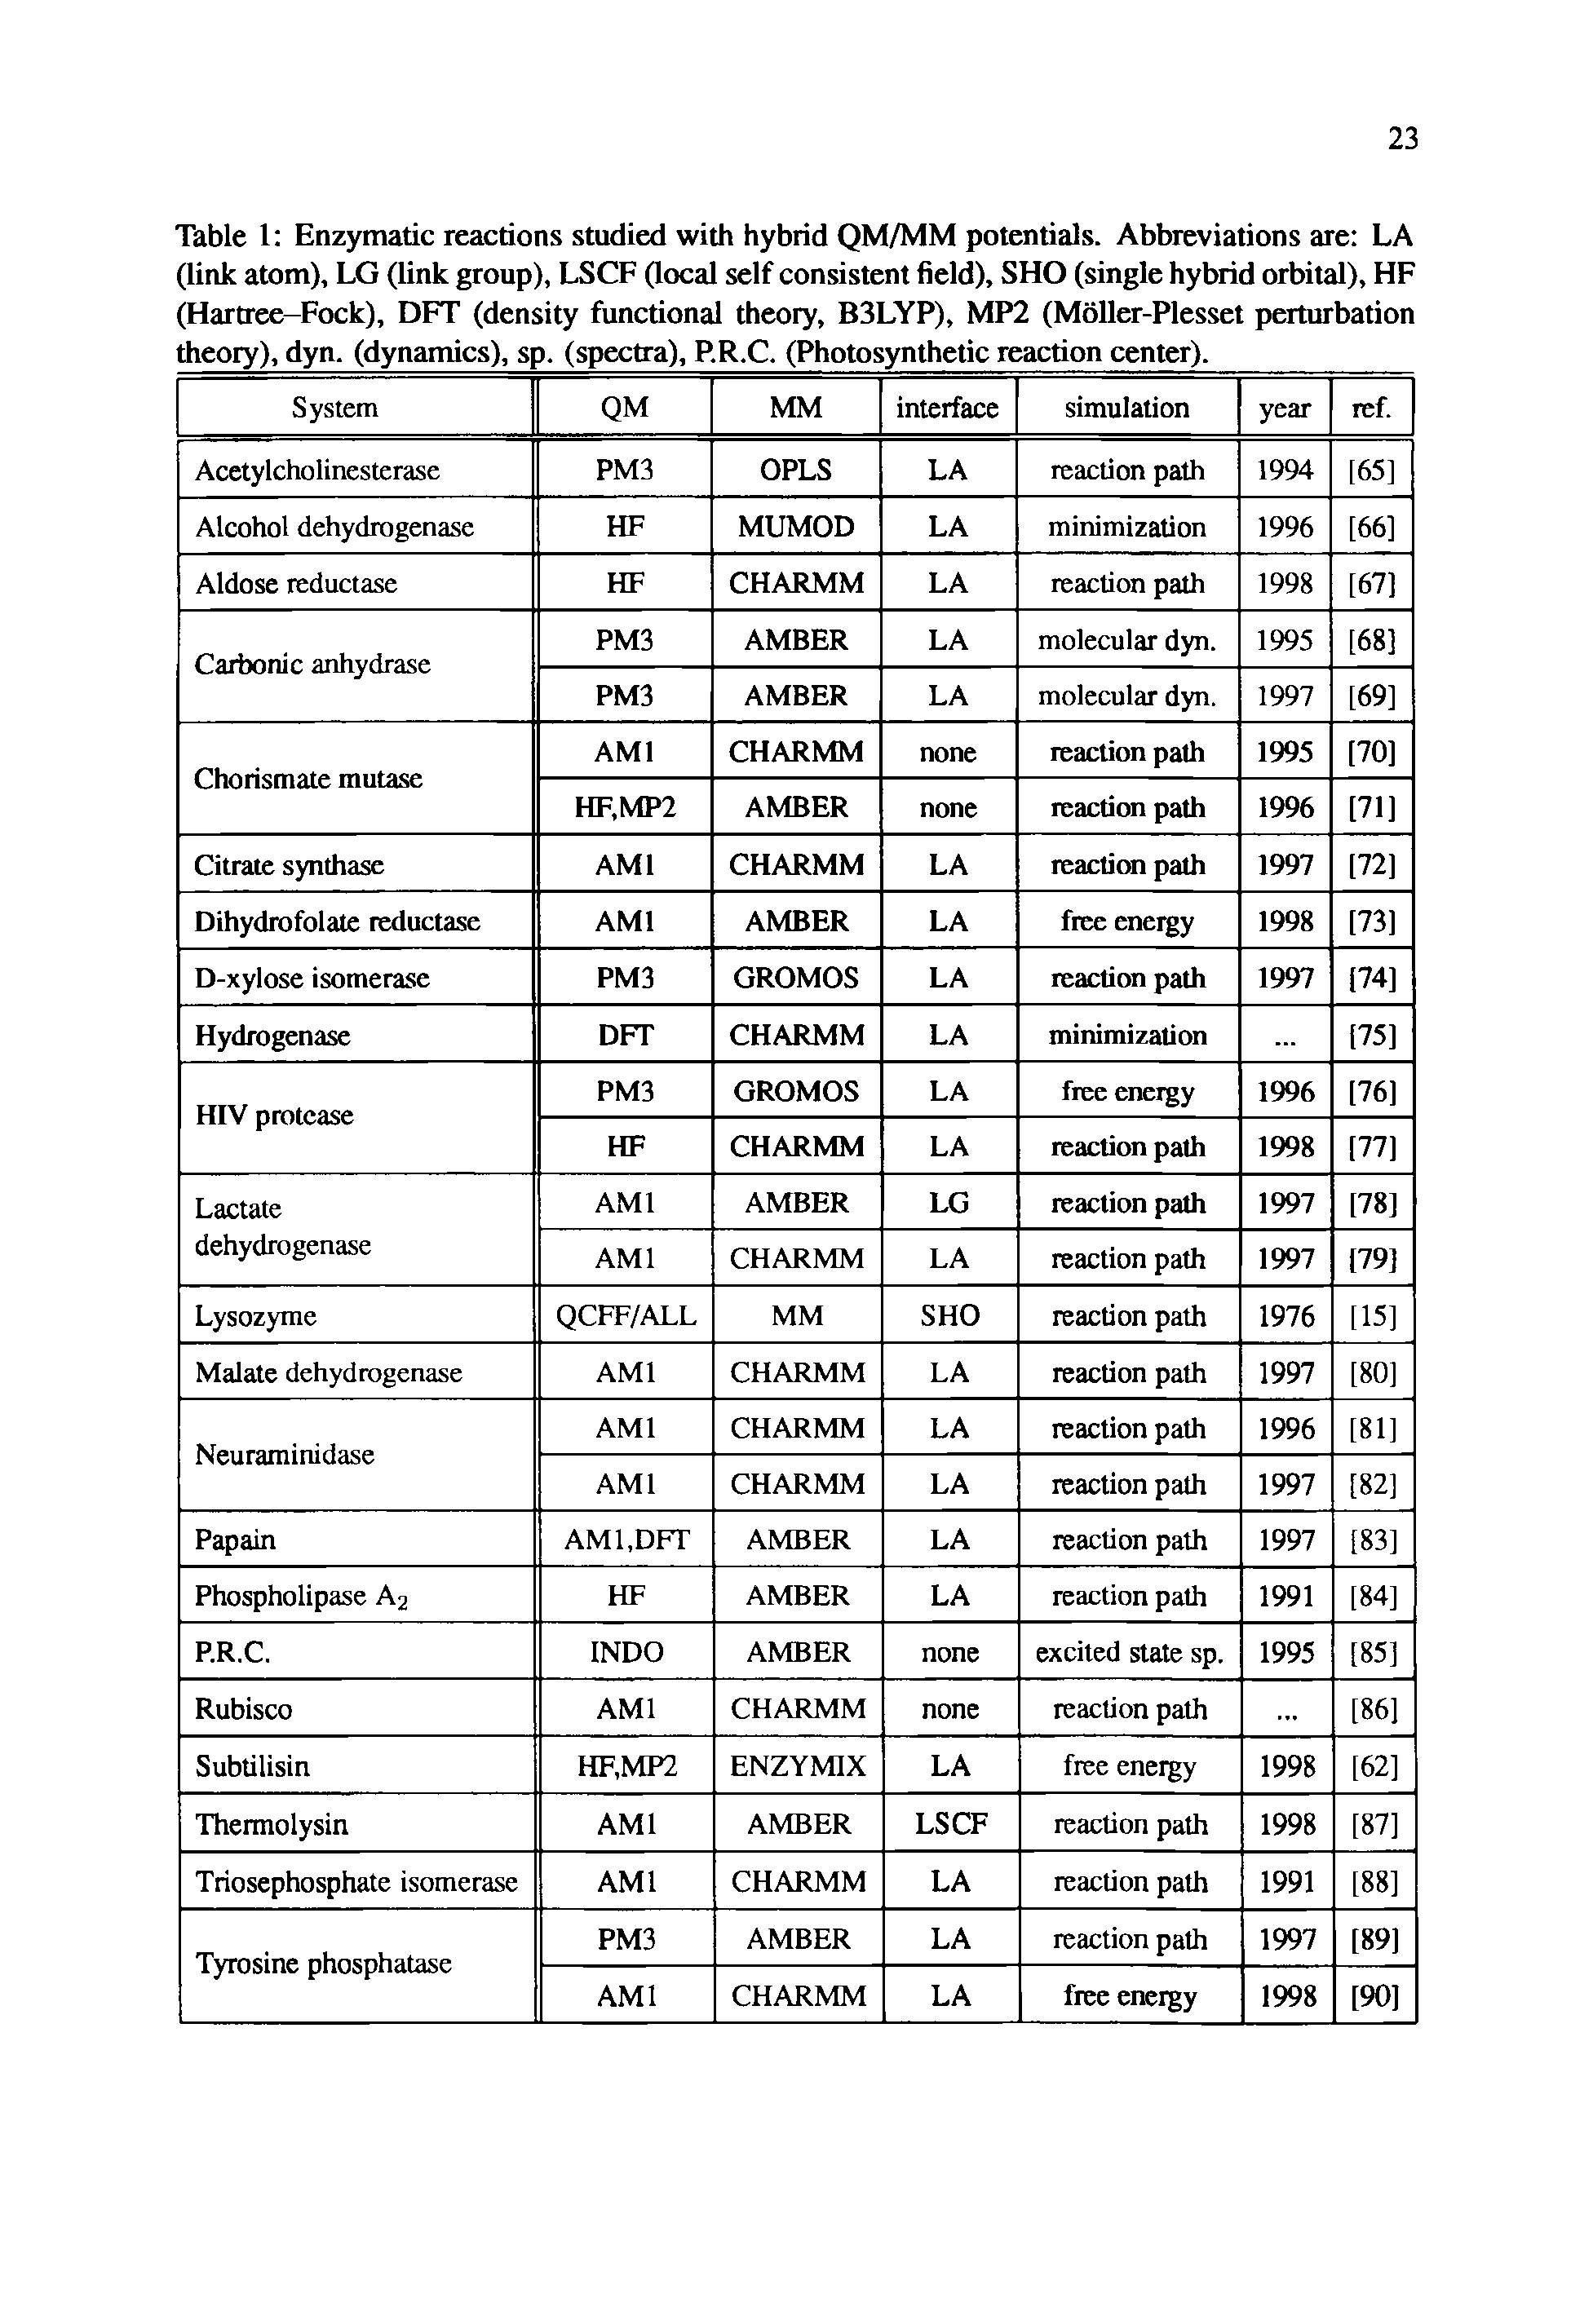 Table 1 Enzymatic reactions studied with hybrid QM/MM potentials. Abbreviations are LA (link atom), LG (link group), LSCF (local self consistent field), SHO (single hybrid orbital), HF (Hartree-Fock), DFT (density functional theory, B3LYP), MP2 (Moller-Plesset perturbation theory), dyn. (dynamics), sp. (spectra), P.R.C. (Photosynthetic reaction center).